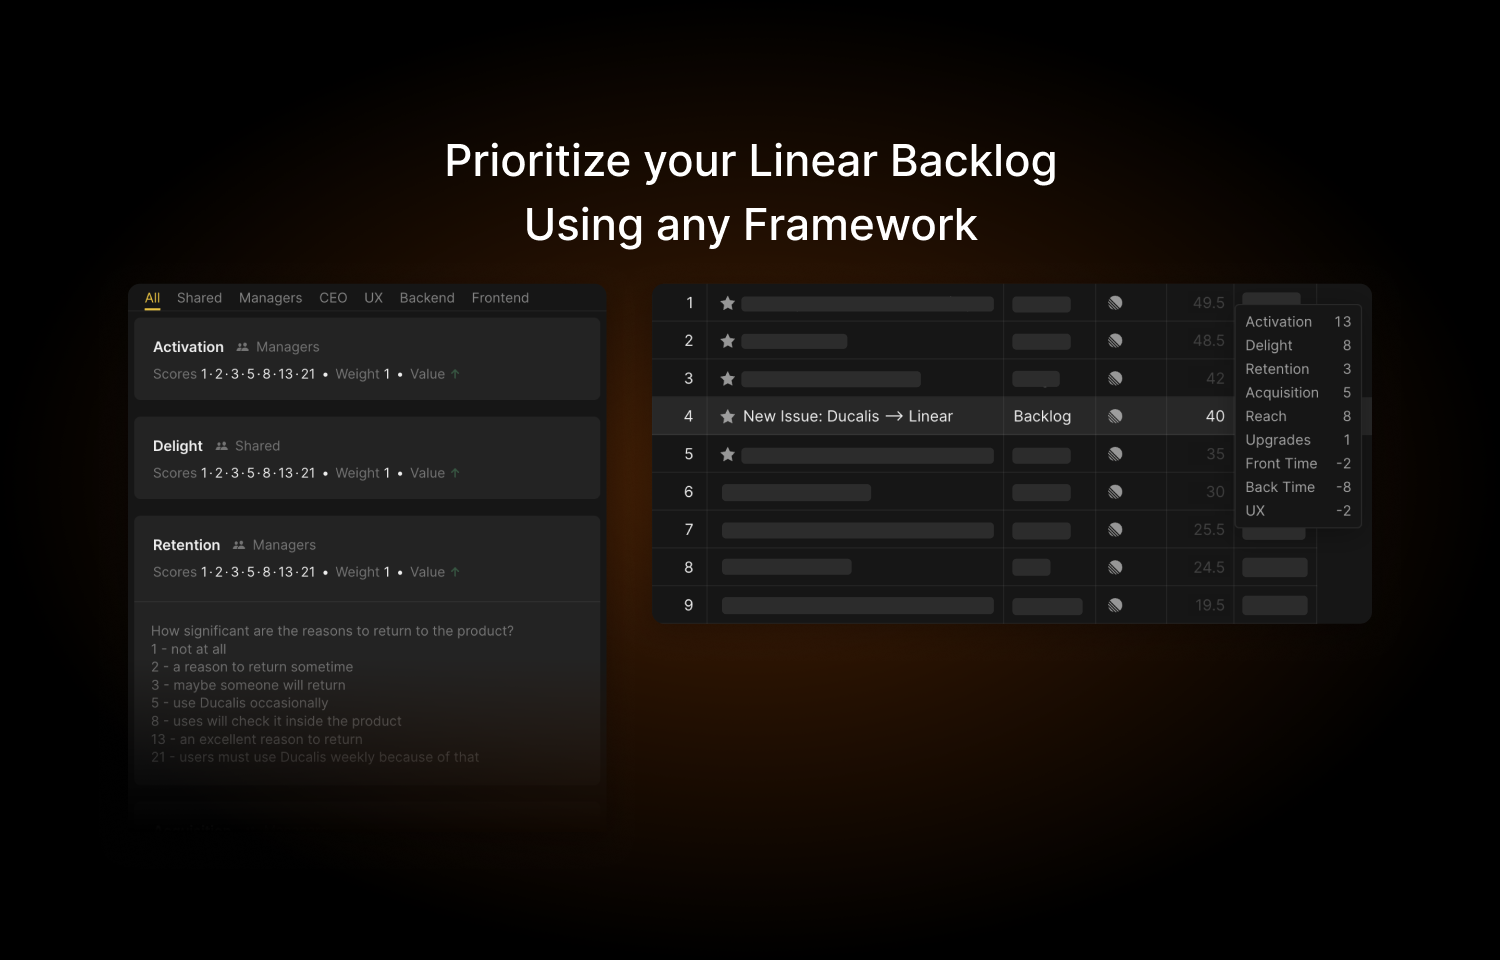 Linear backlog synced with Ducalis to help with prioritisation